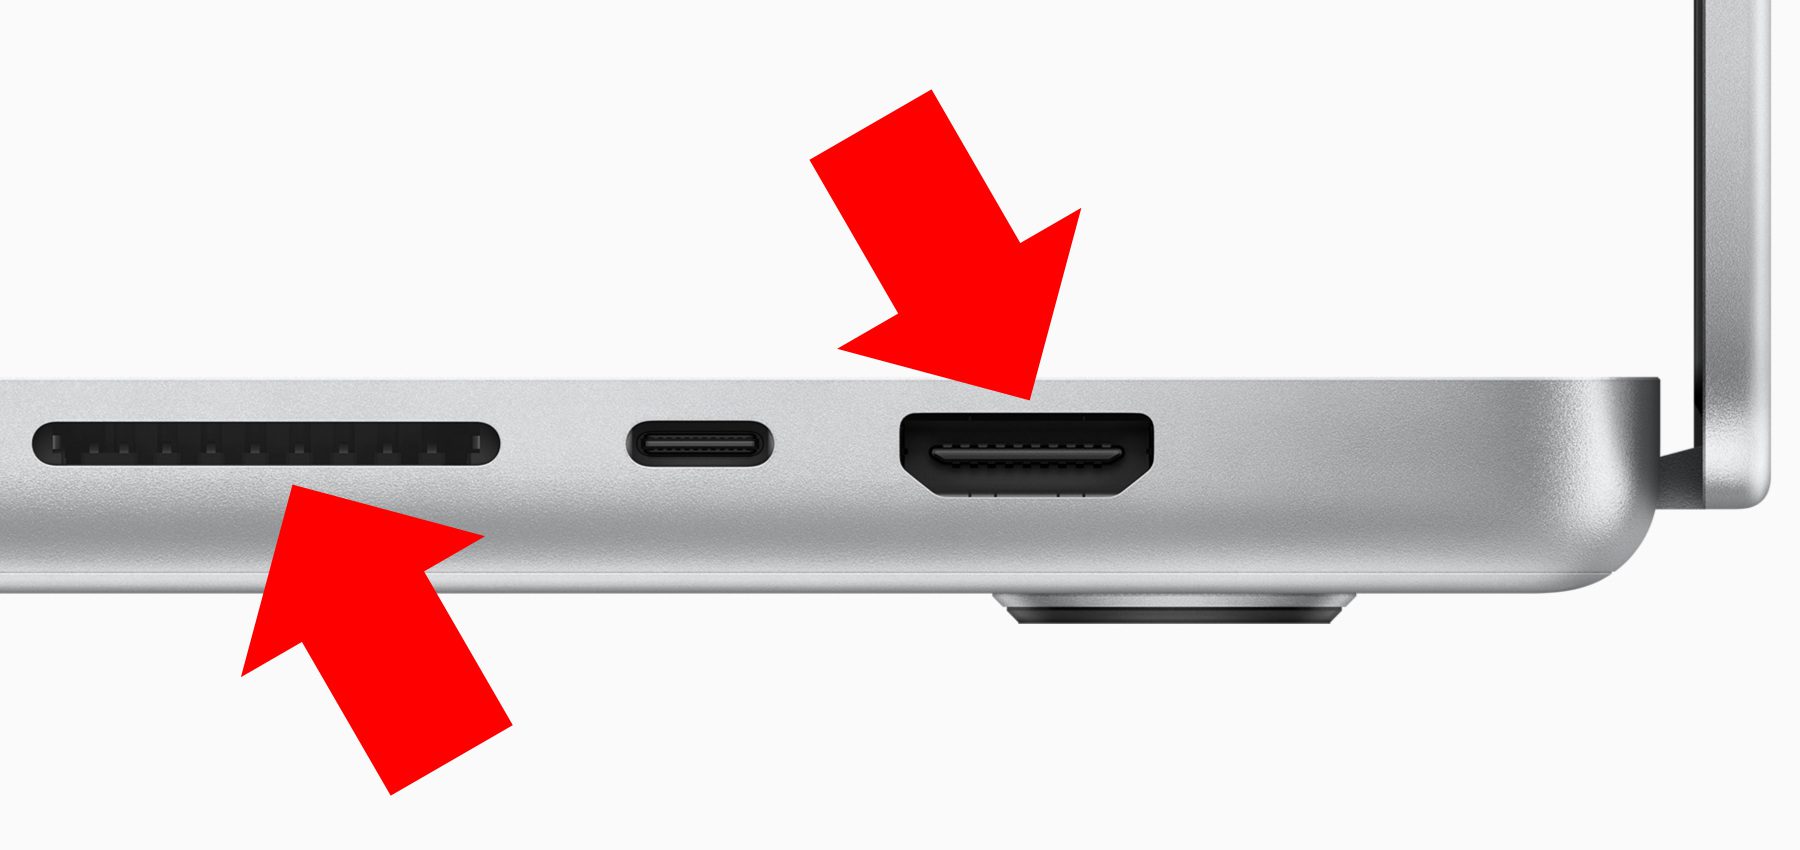 Hurtig system bekymre MacBook Pro 2021 - Details on SD slot and HDMI connection »Sir Apfelot